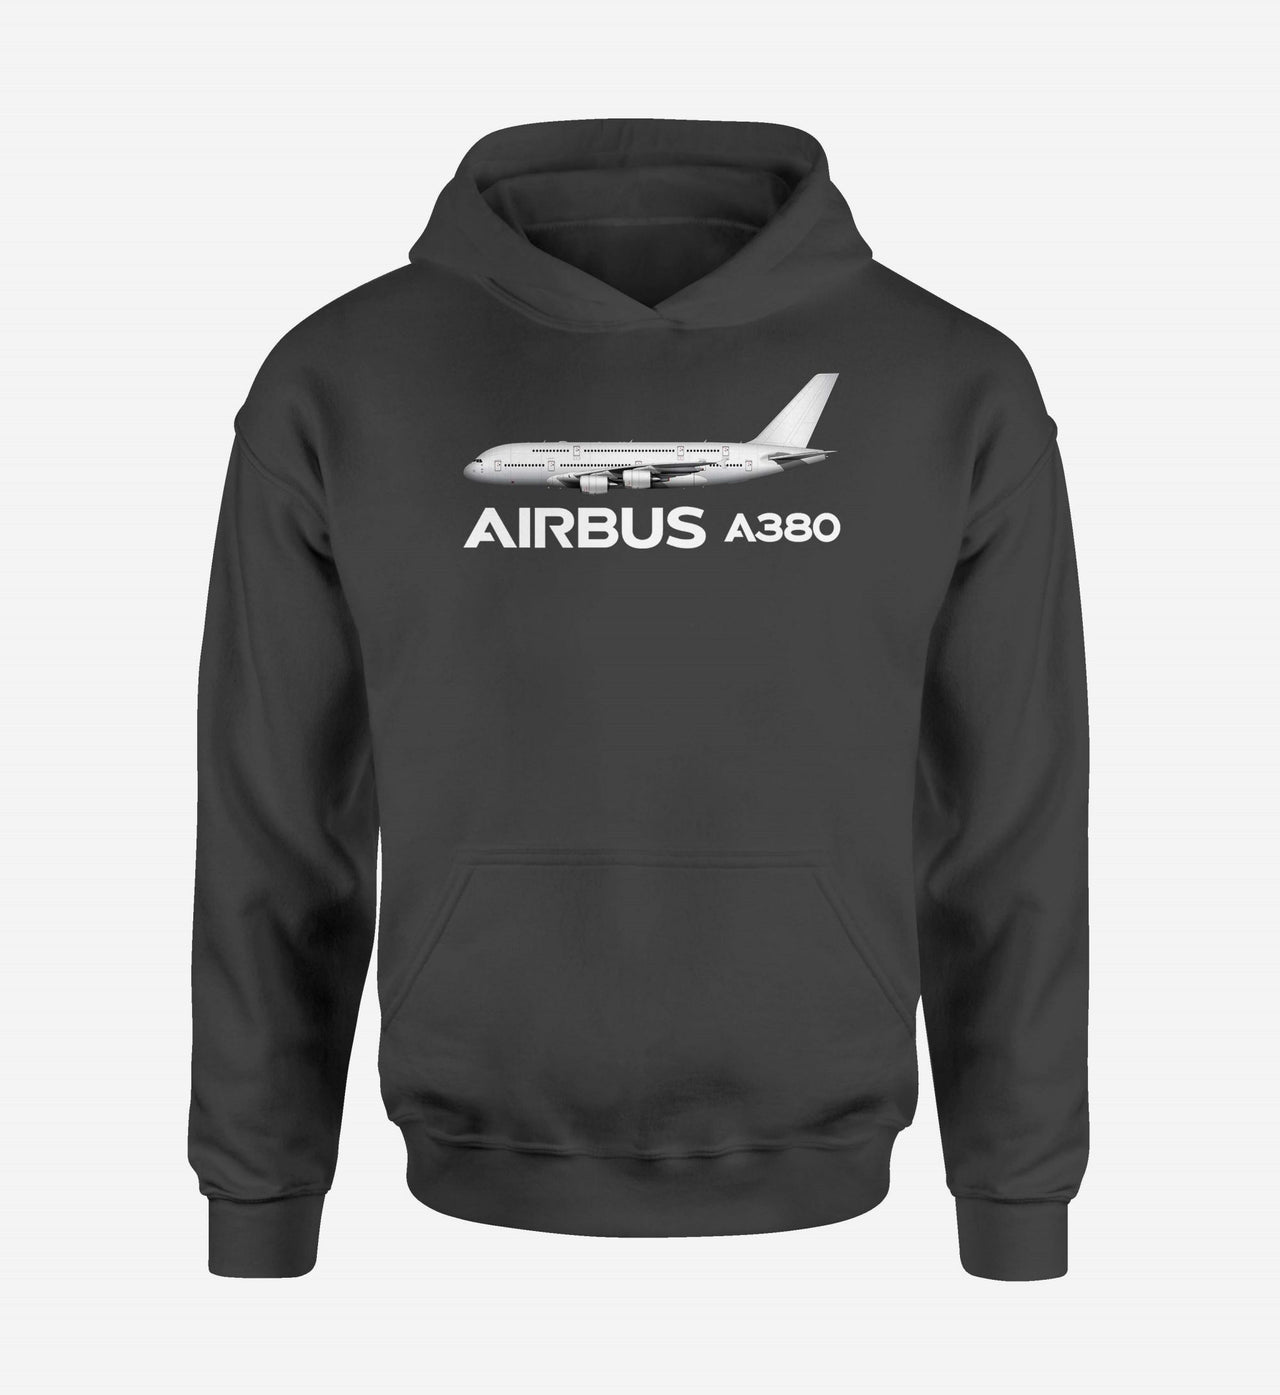 The Airbus A380 Designed Hoodies